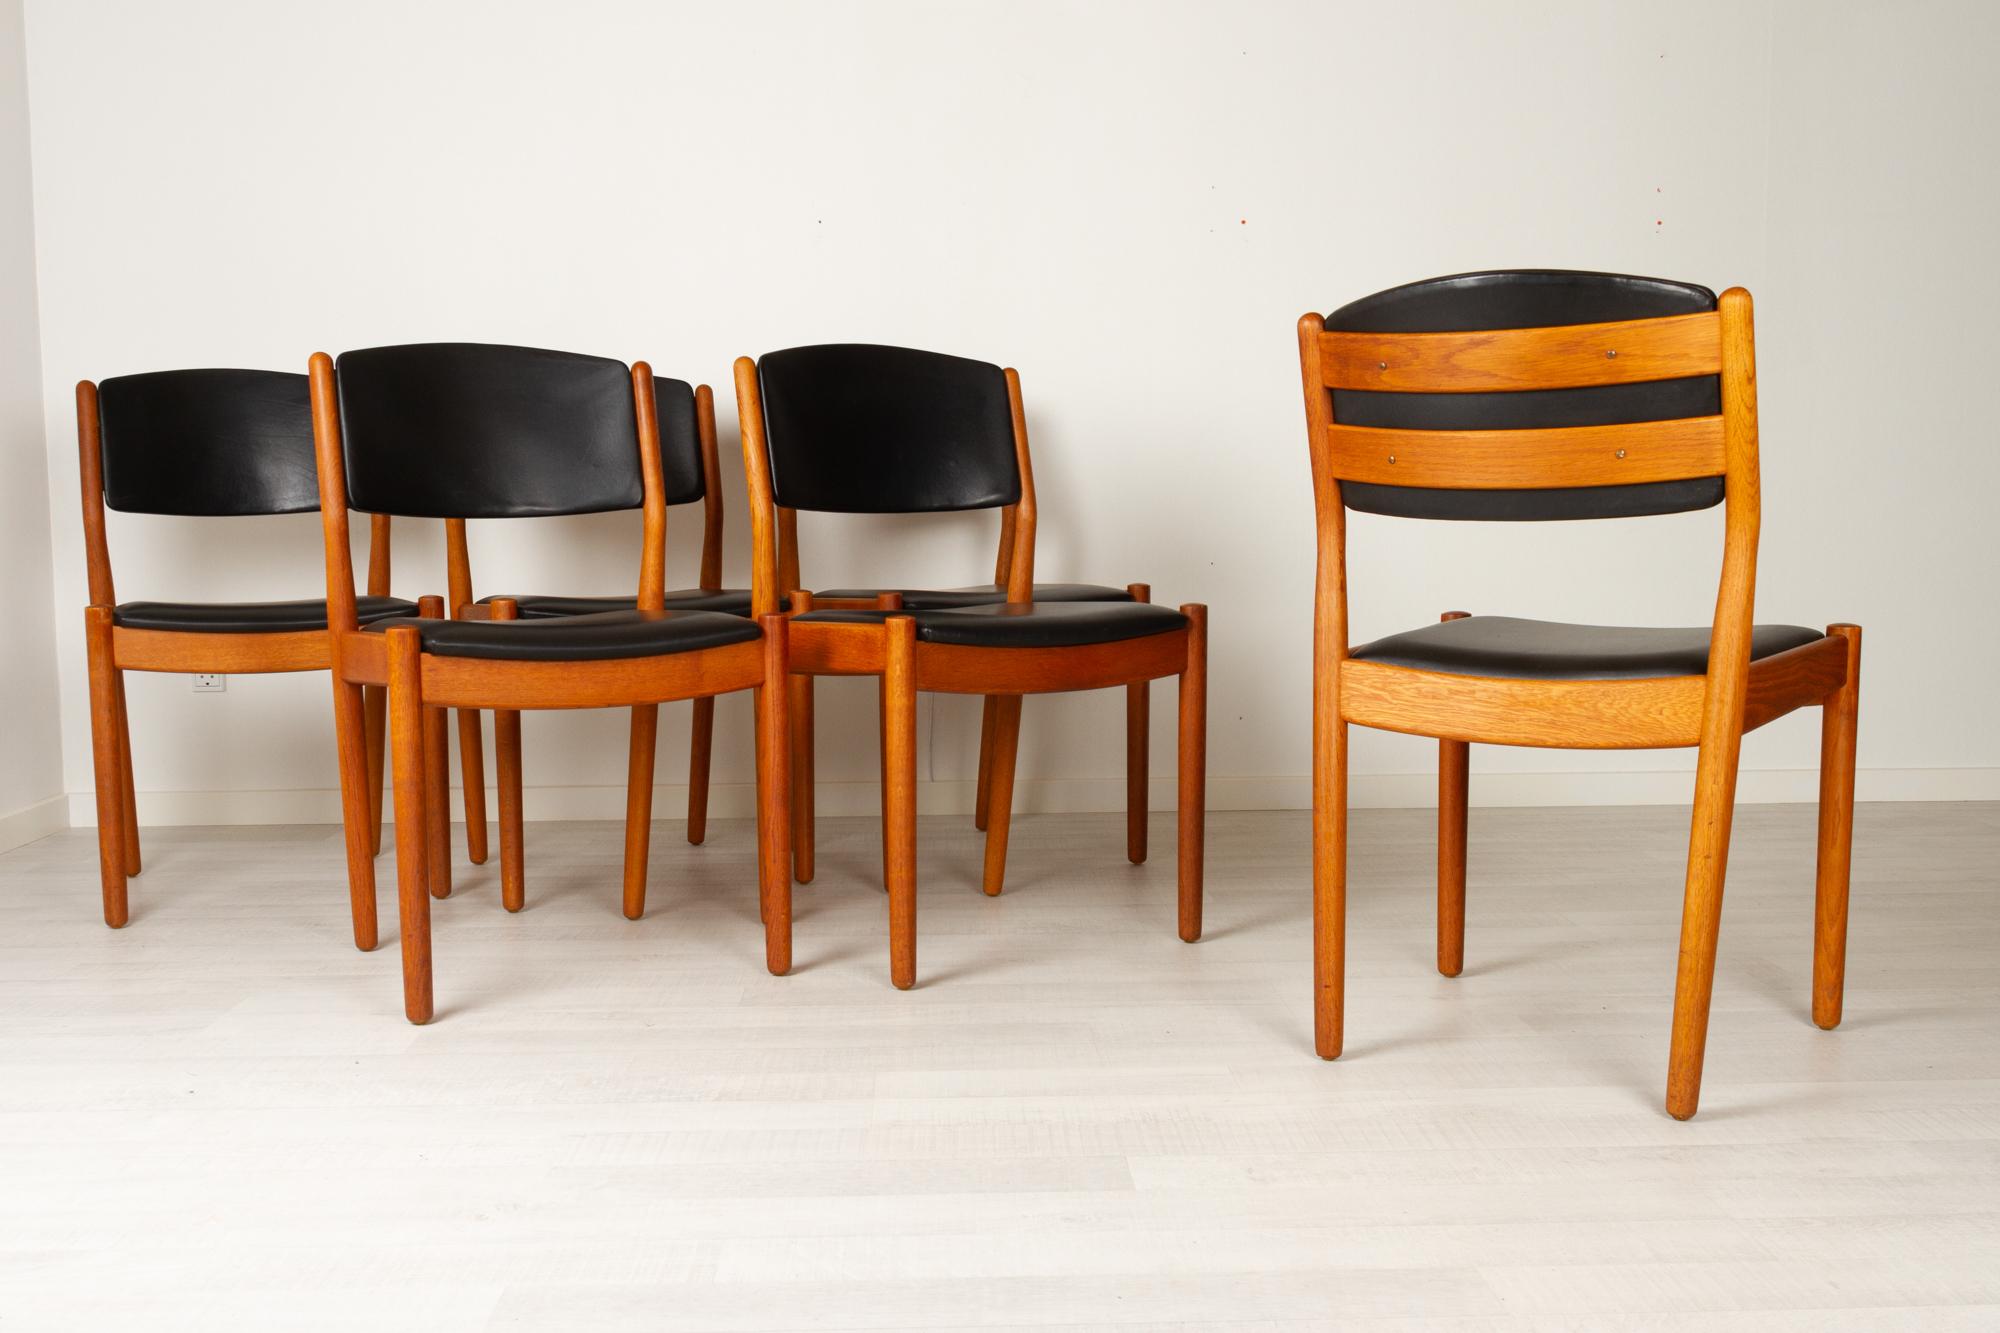 Vintage Danish J 61 dining chairs by Poul Volther for FDB Møbler, 1960s, set of 6
Set of six chairs in solid teak stained oak with original skai upholstery. Very good build quality, and very comfortable with good back support.
All chairs have